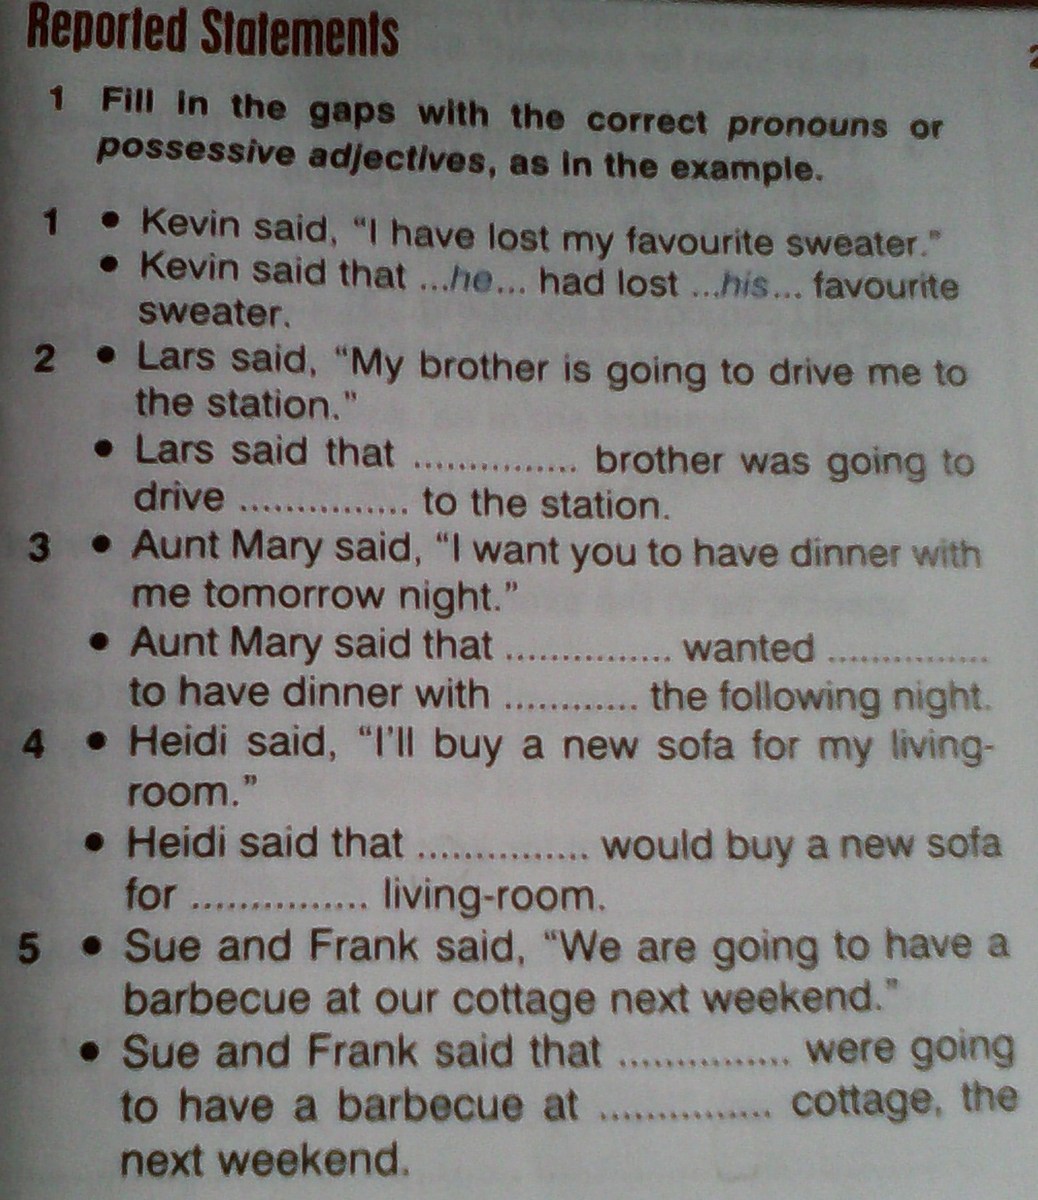 Brother said that he. Fill in with the possessive adjectives. Fill in the gaps with the correct pronouns or possessive adjectives as in the example Kevin said i have. Fill in the gaps with the correct pronouns or possessive adjectives as in the example Kevin said. Fill in the gaps with the correct pronouns or possessive adjectives as in the example Kevin said i have Lost.